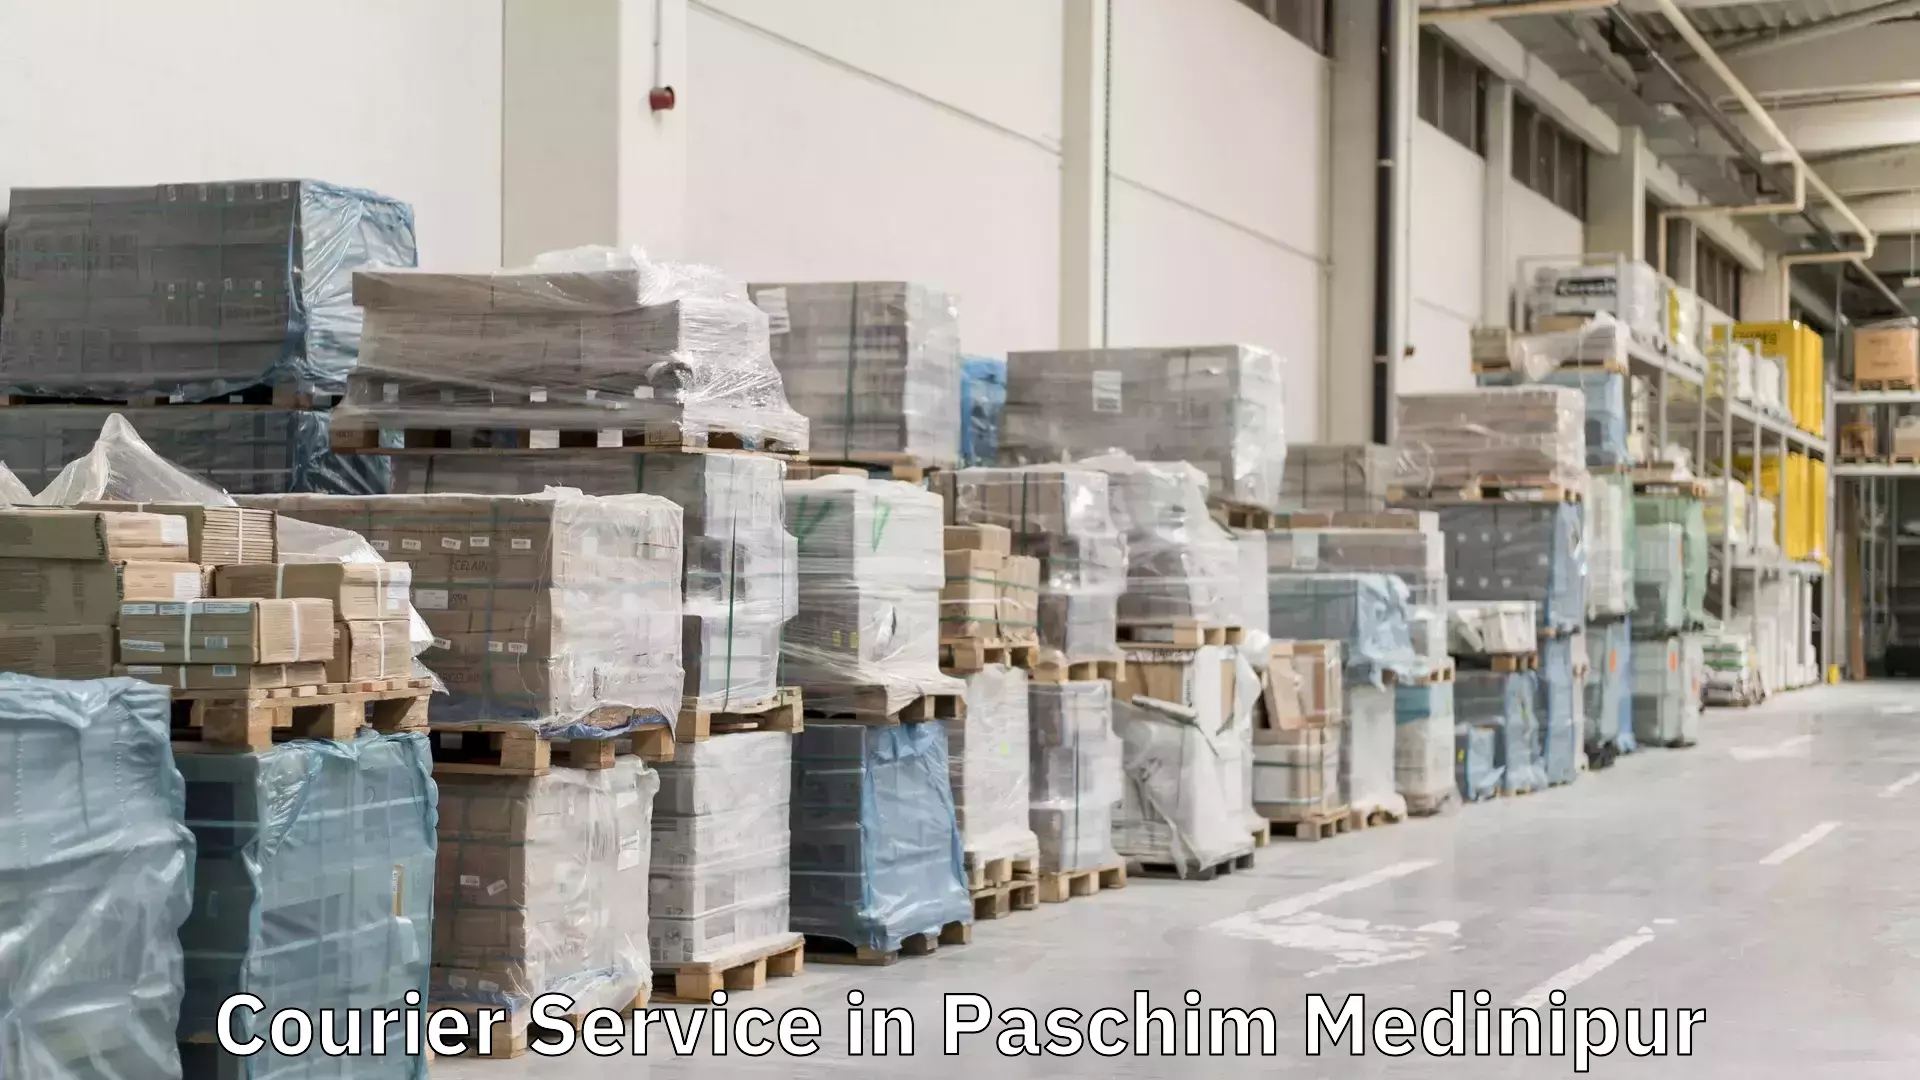 Cost-effective courier options in Paschim Medinipur